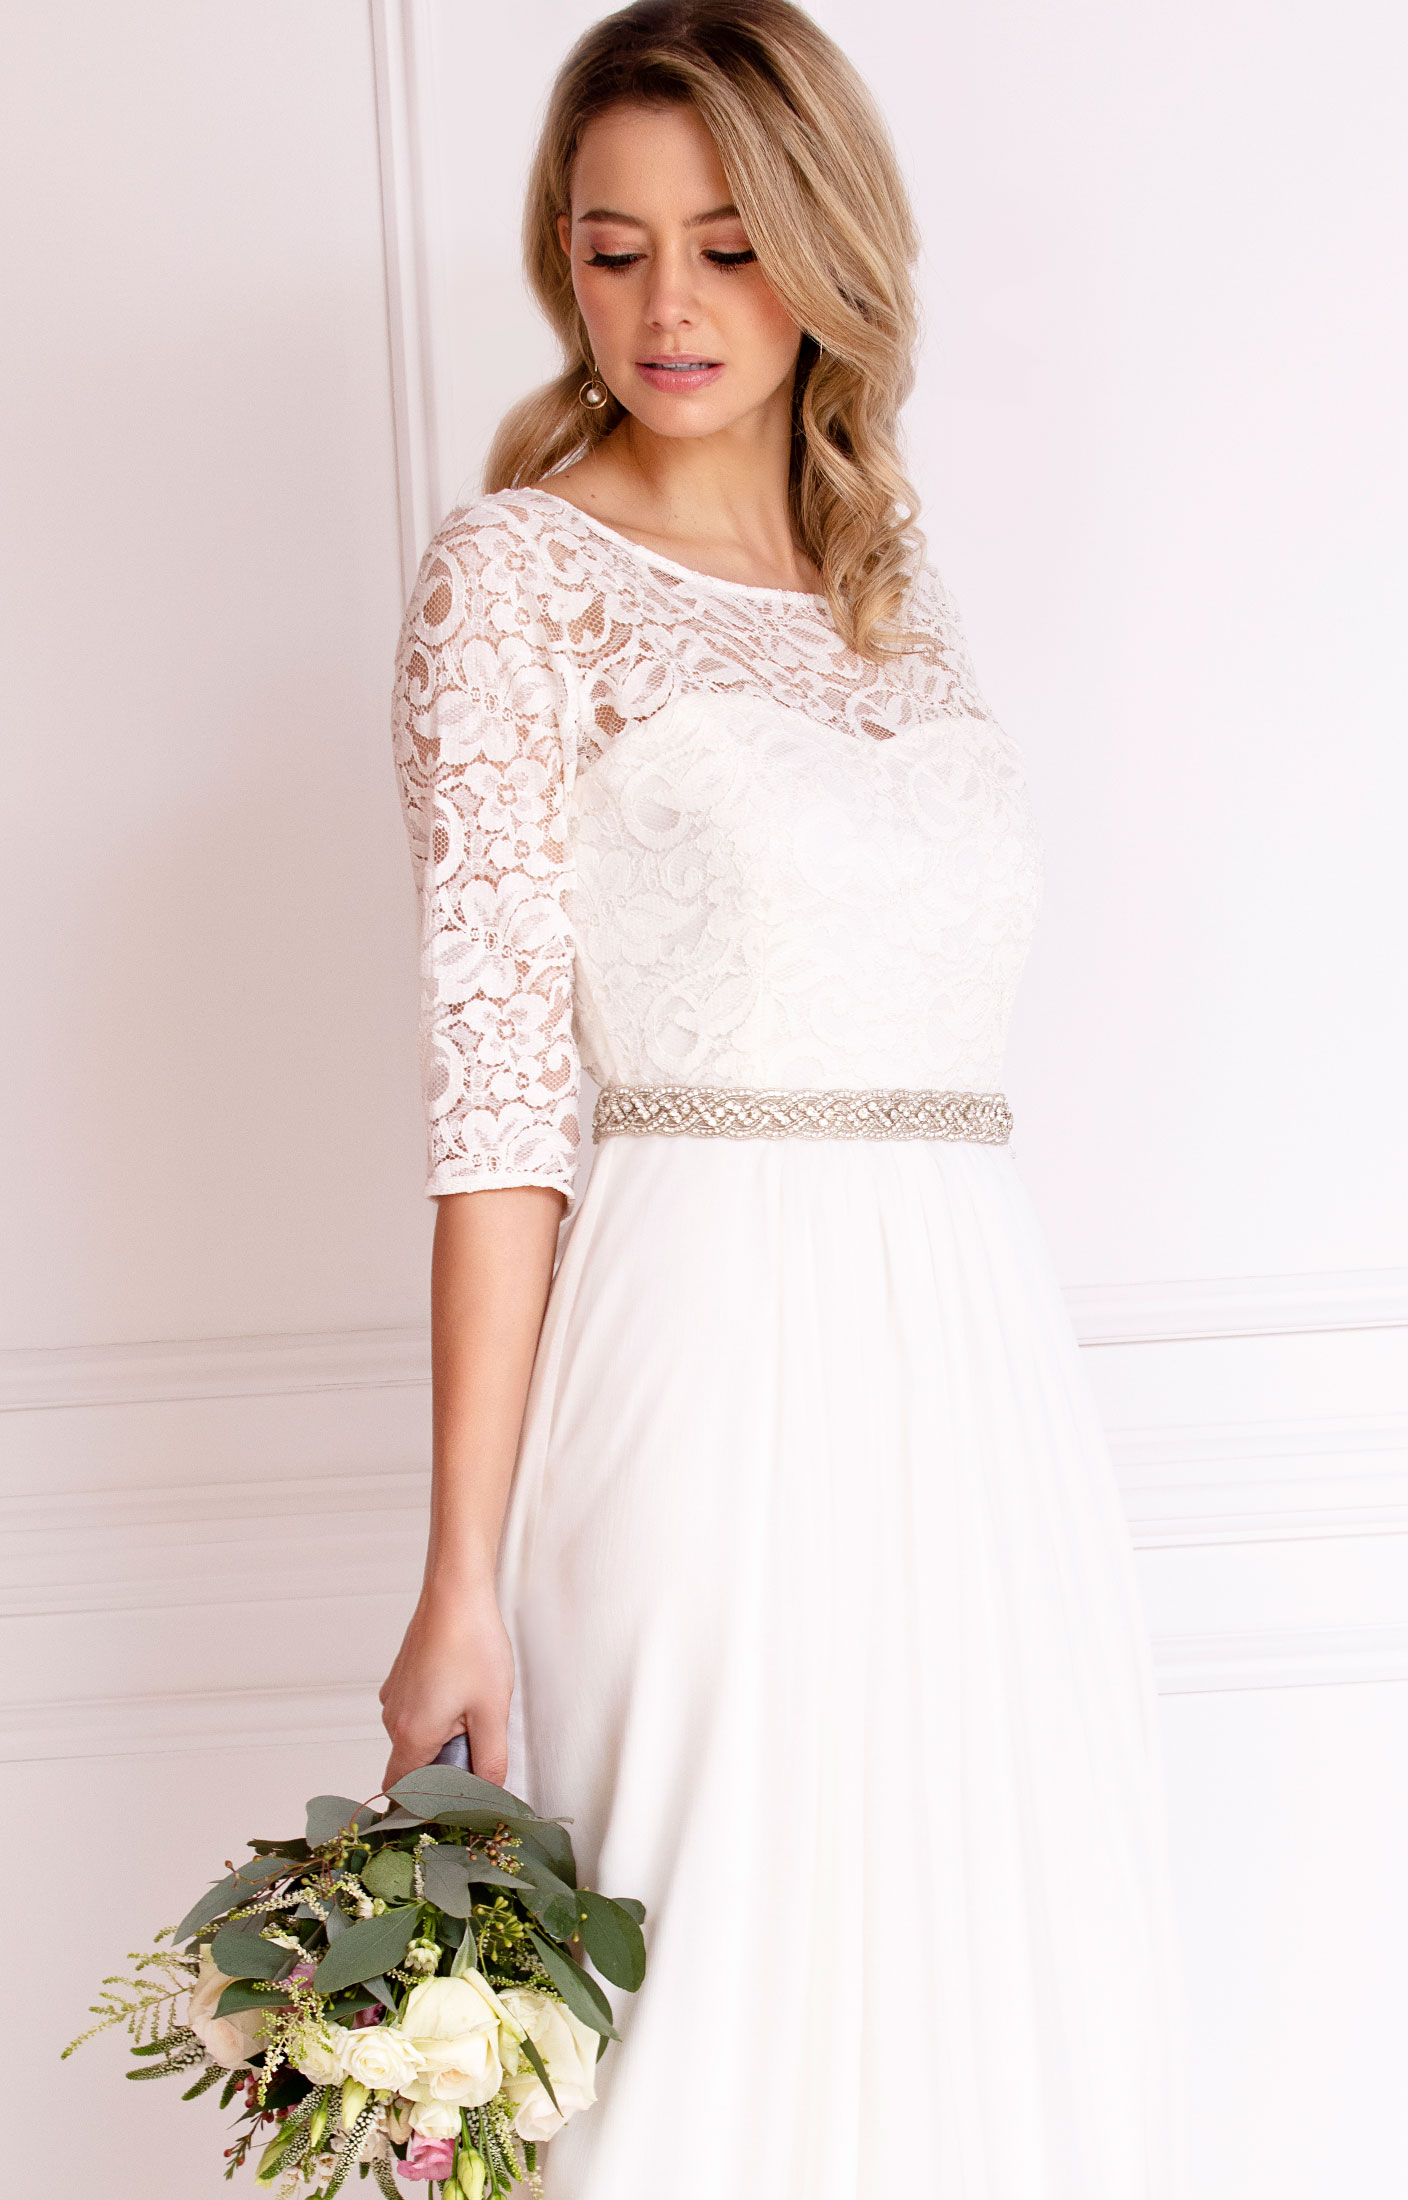 Lila Wedding Gown Long Ivory - Wedding Dresses, Evening Wear and Party  Clothes by Alie Street.